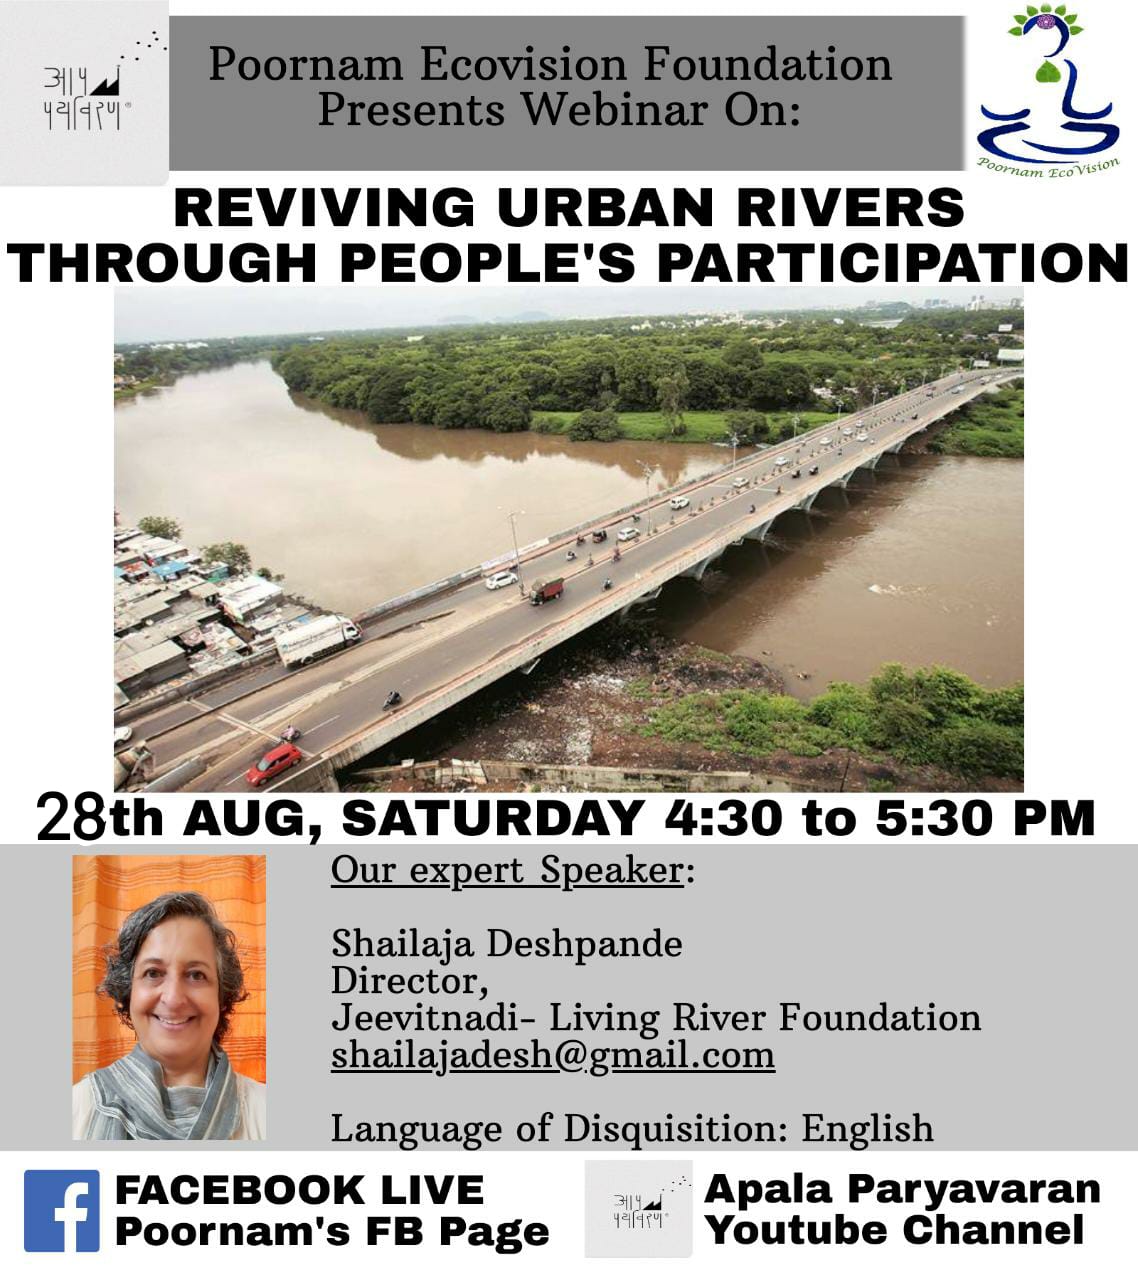 Webinar on Reviving Urban Rivers Through People's Participation